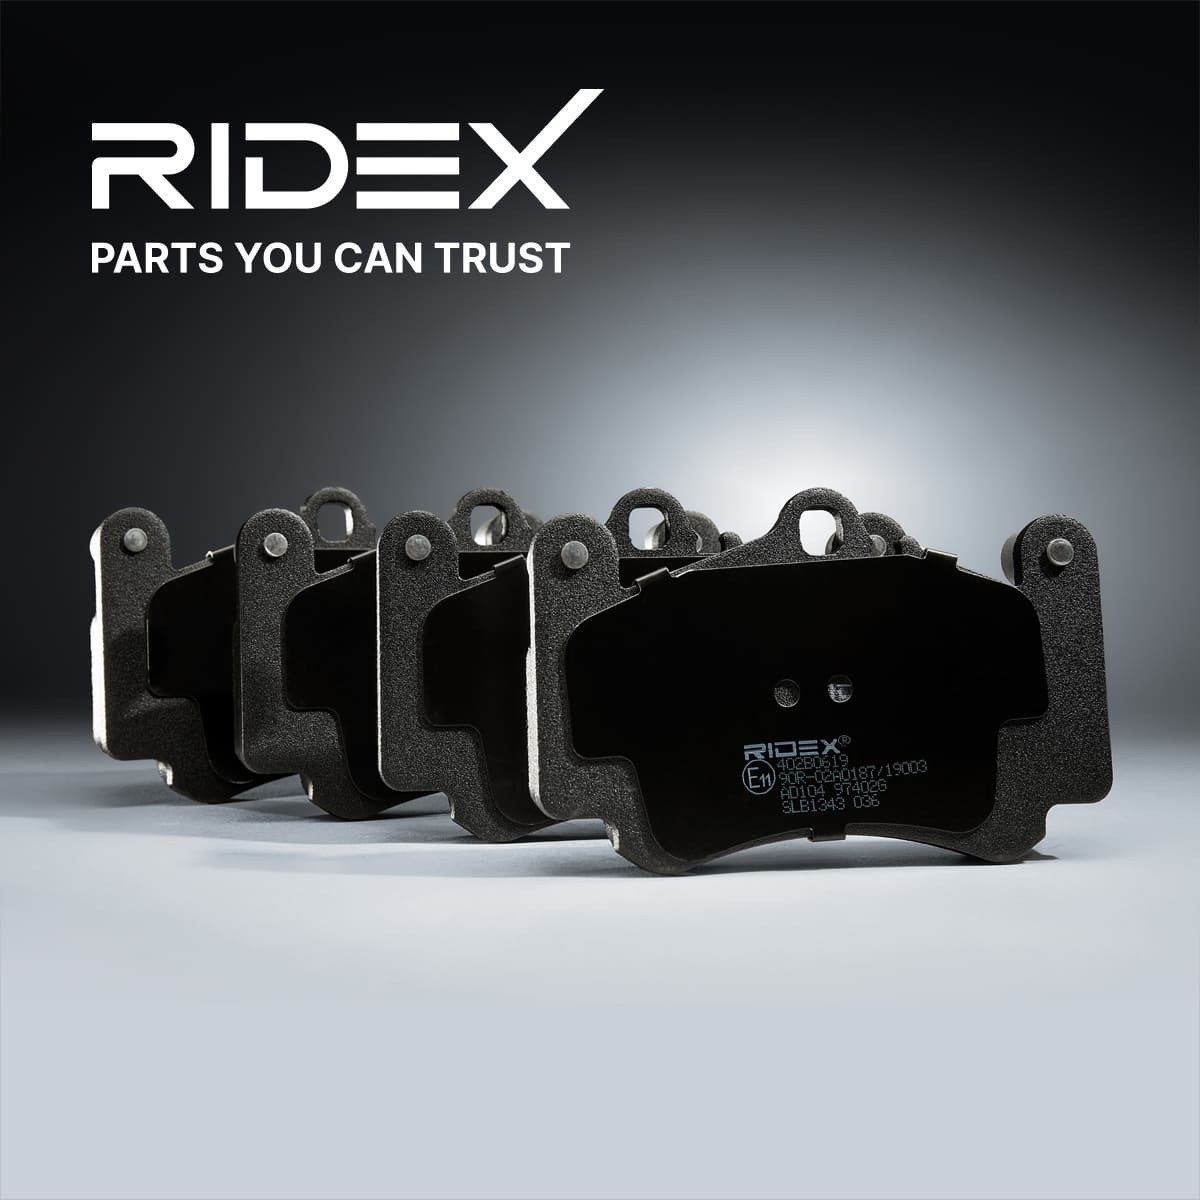 RIDEX Brake pad kit 402B0547 suitable for MERCEDES-BENZ S-Class